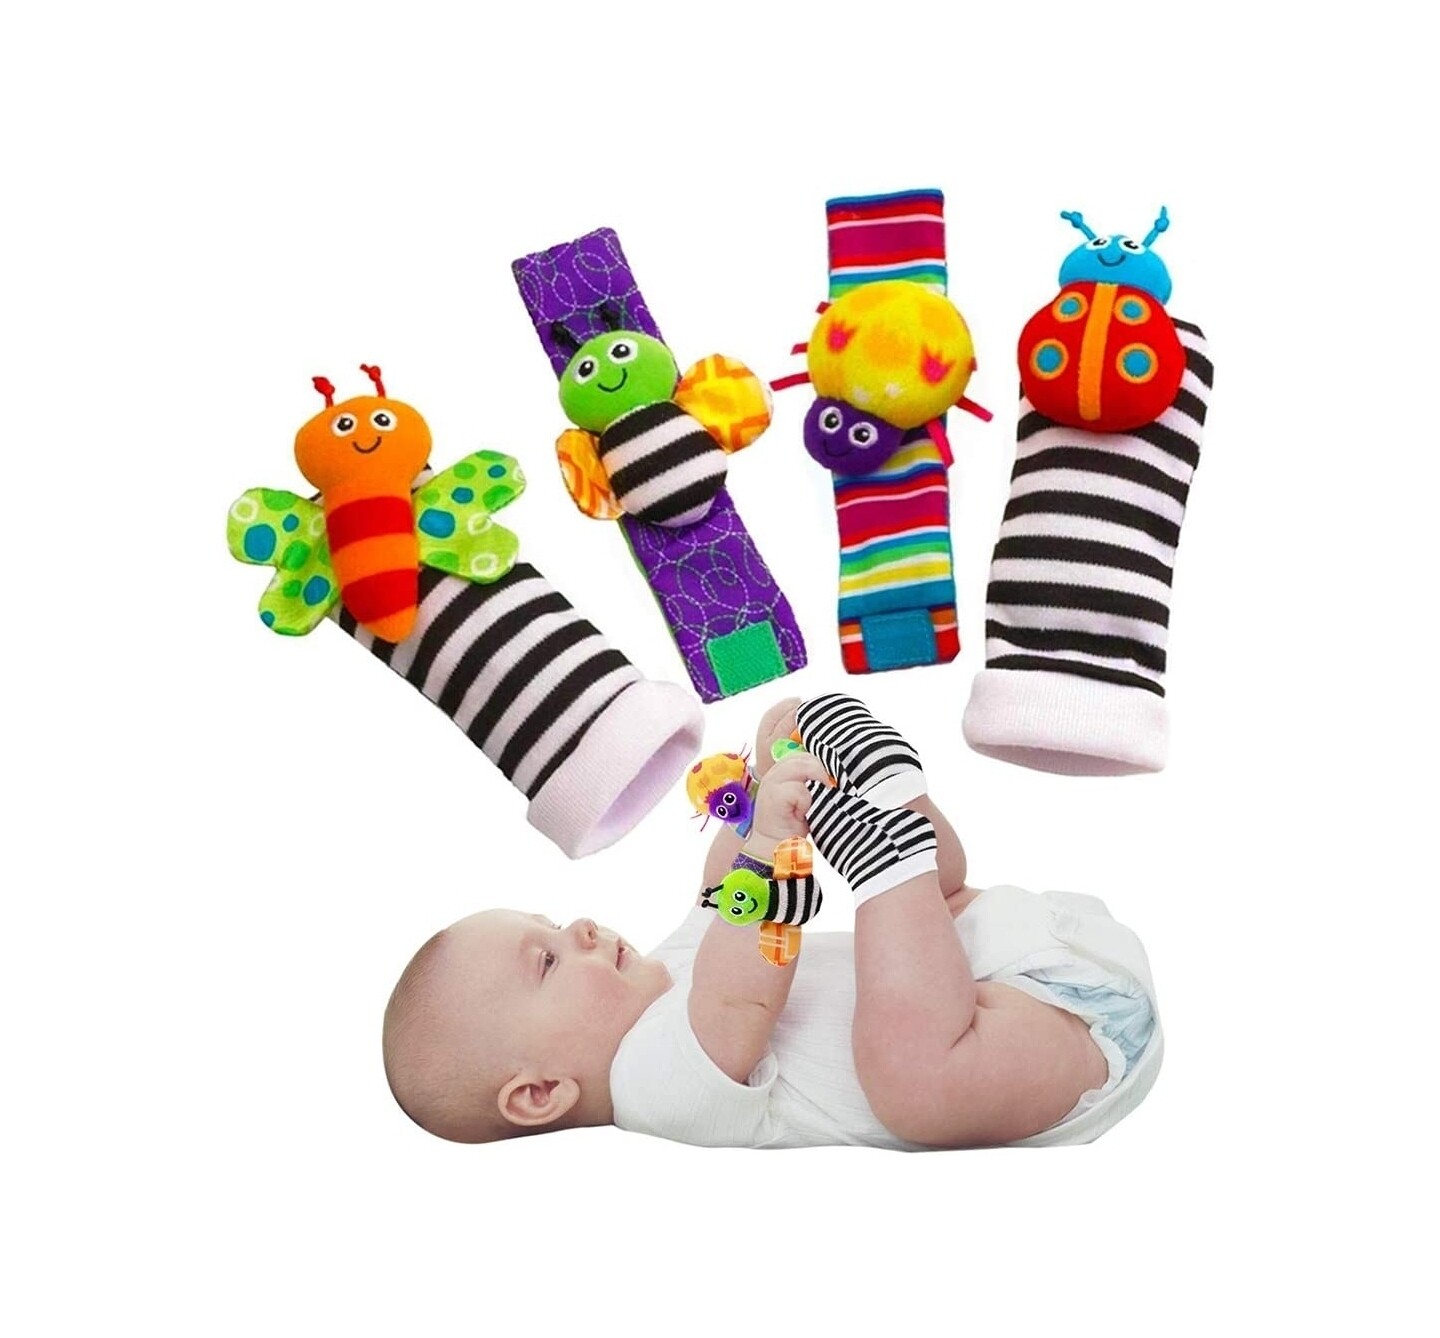 SMTF Cute Animal Soft Baby Socks Toys Wrist Rattles and Foot Finders for Fun Butterflies and Lady bugs Set 4 pcs